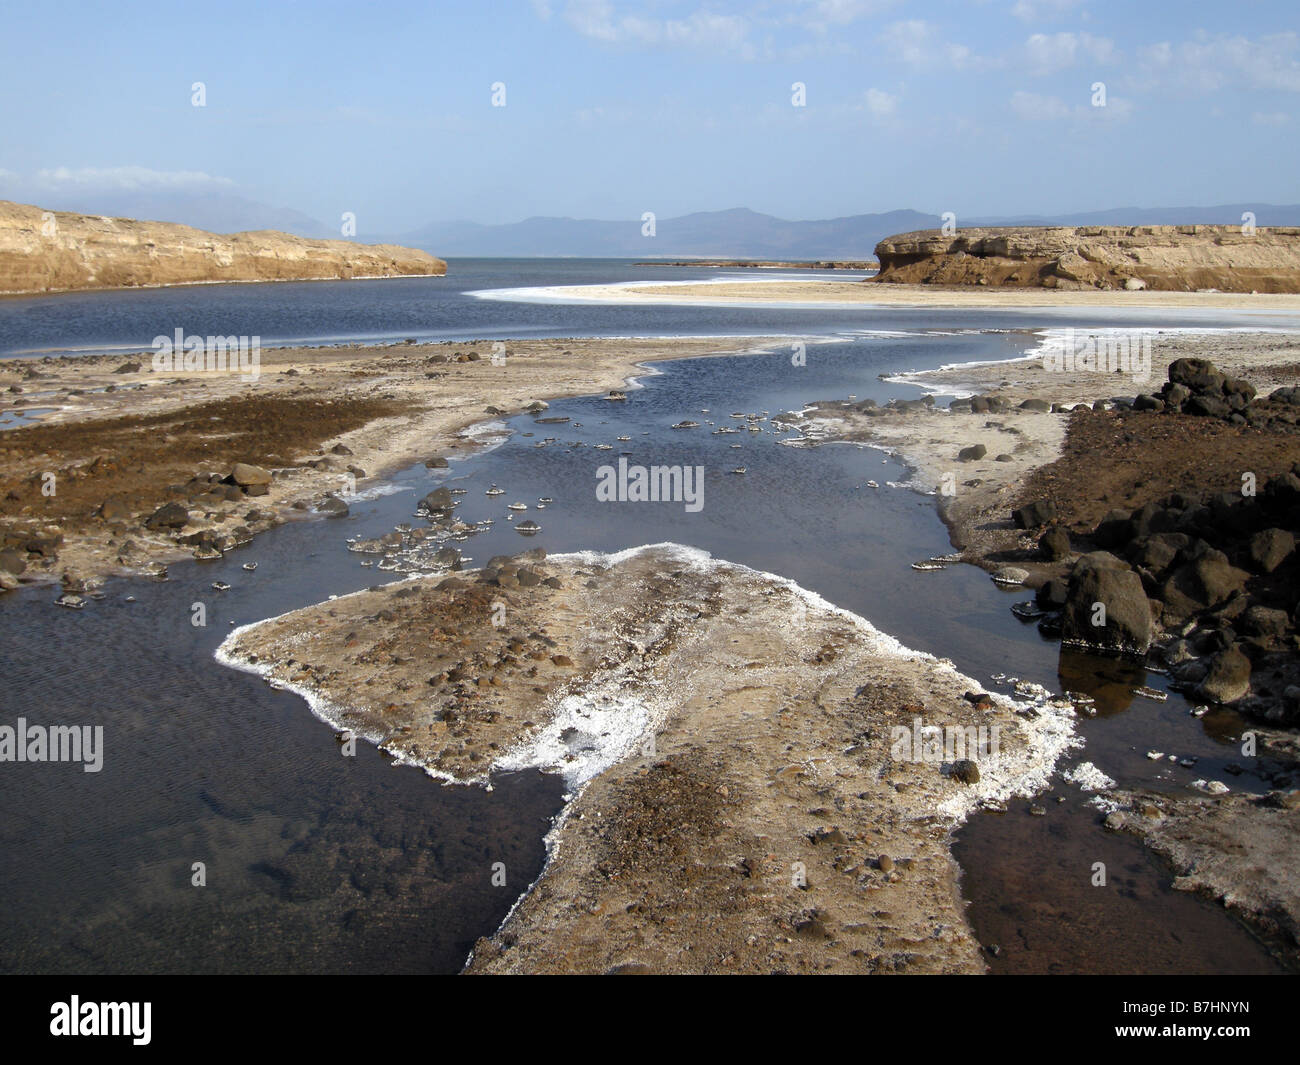 View overlooking Lake Assal, lowest place in Africa and Saltiest Place on Earth. Djibouti. Stock Photo